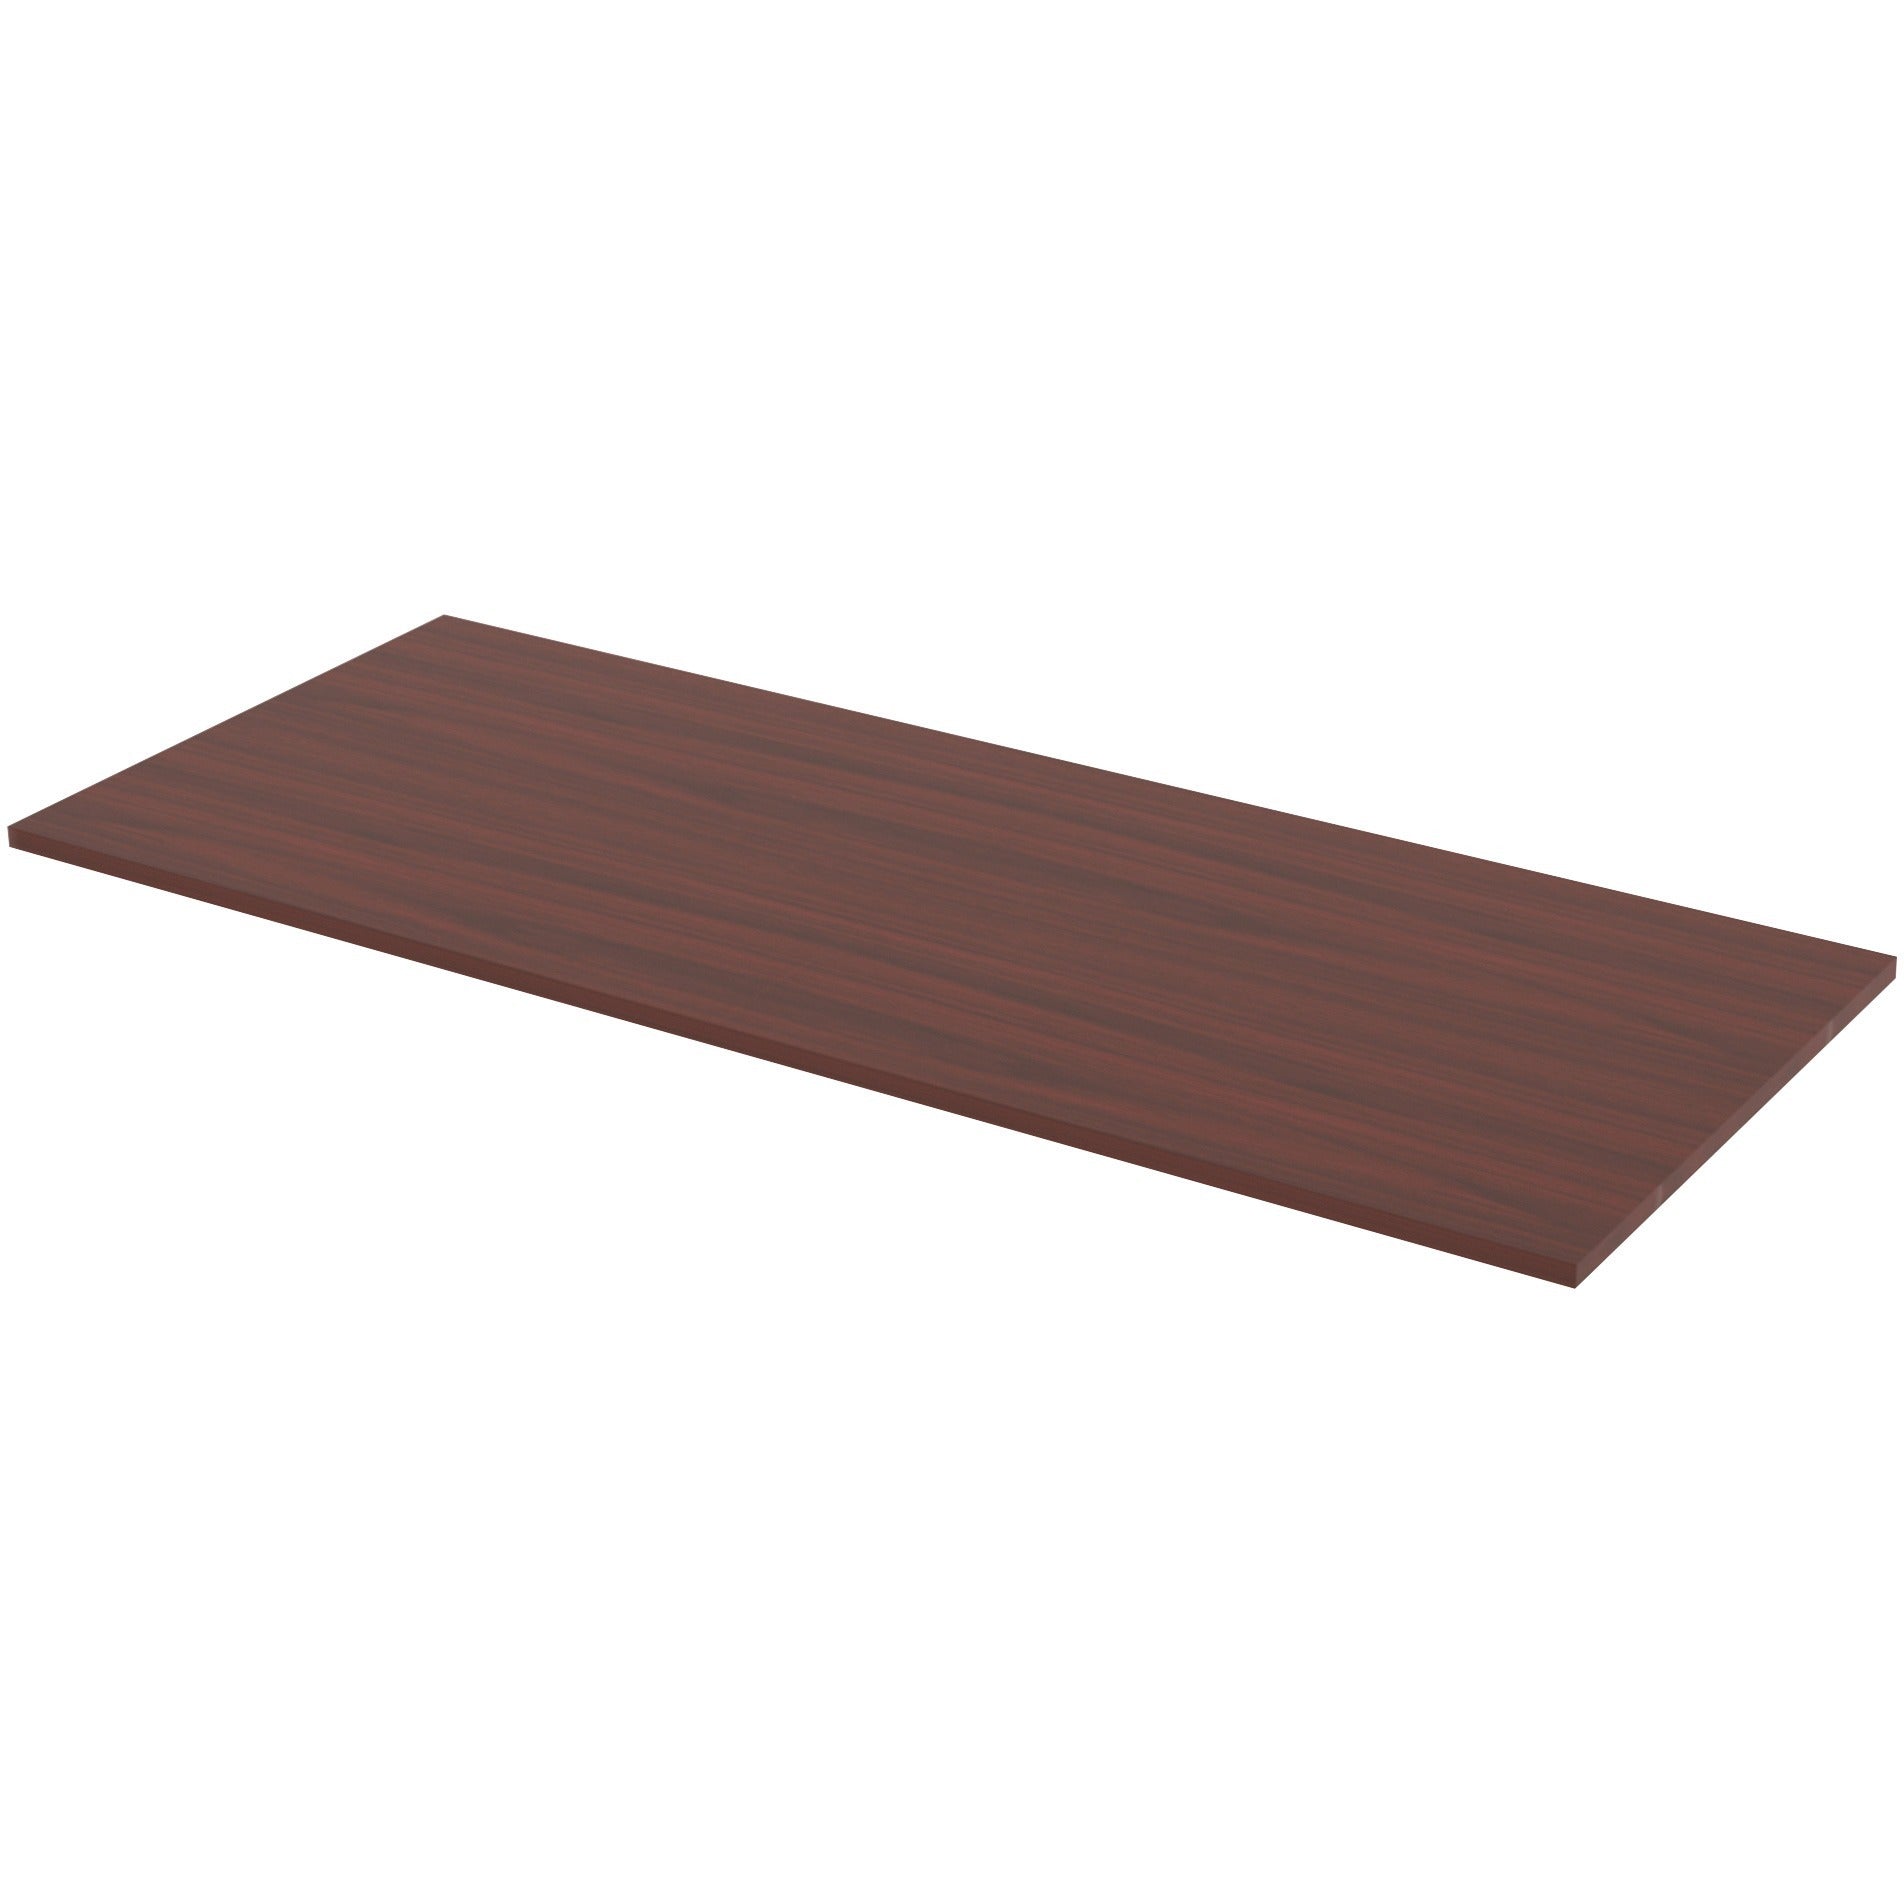 lorell-relevance-series-tabletop-for-table-toprectangle-top-contemporary-style-adjustable-height-x-72-table-top-width-x-30-table-top-depth-x-1-table-top-thickness-assembly-required-mahogany-laminated-1-each_llr34405 - 3